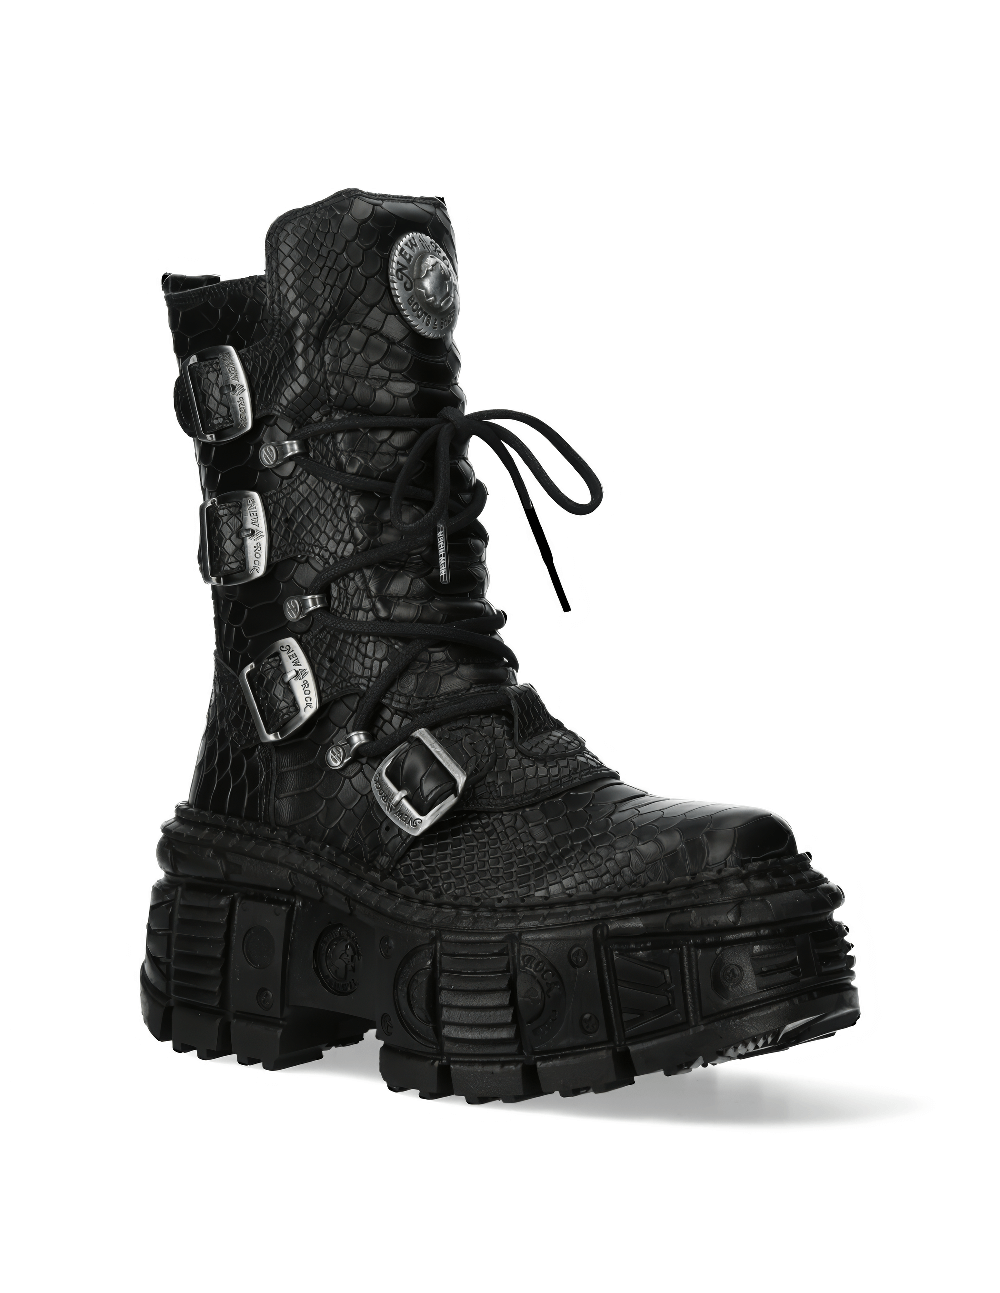 NEW ROCK Gothic Mid-Calf Boots with Buckles and Zipper